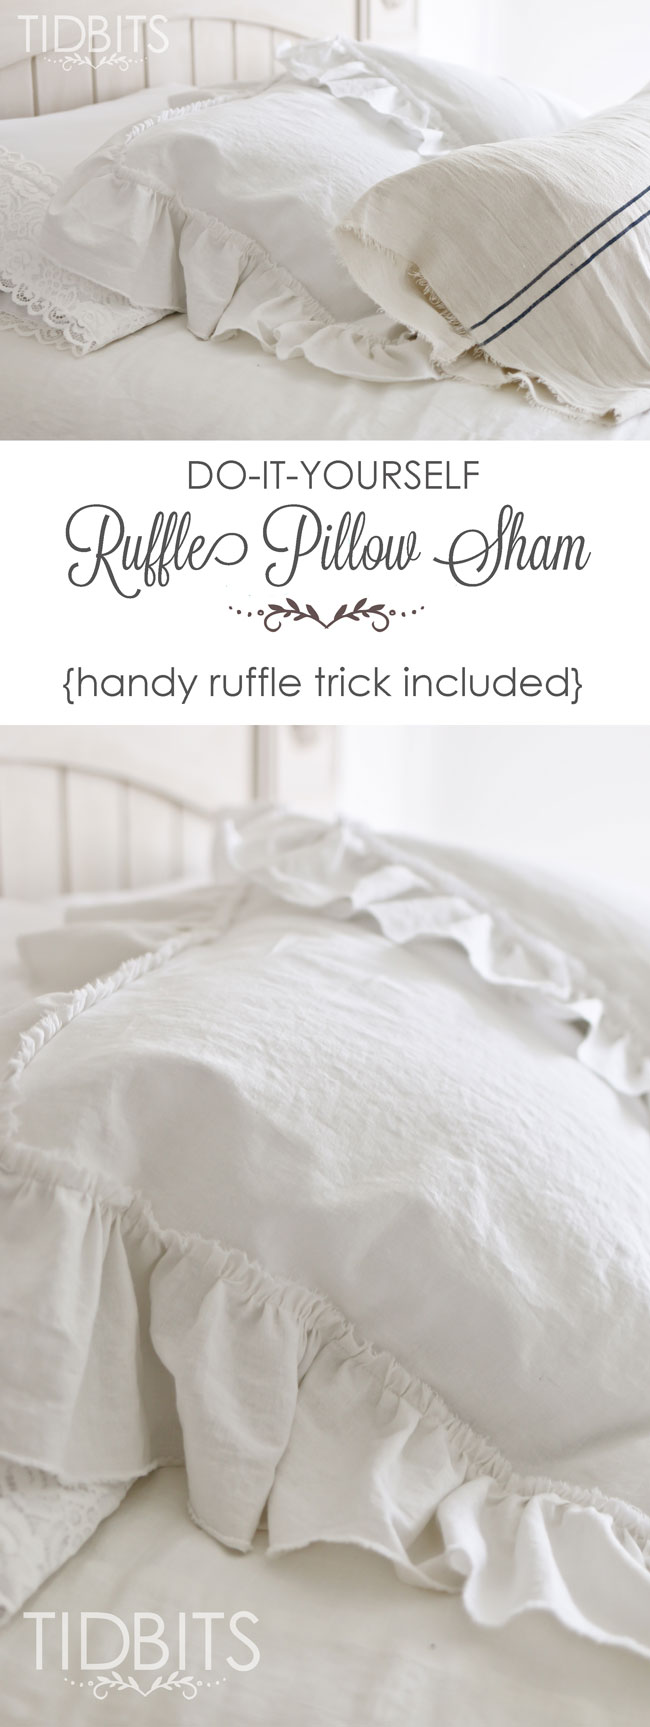 Ruffle Pillow Sham tutorial. Grab some white cozy linen fabric and make the most dreamy decorative pillows for your bed.